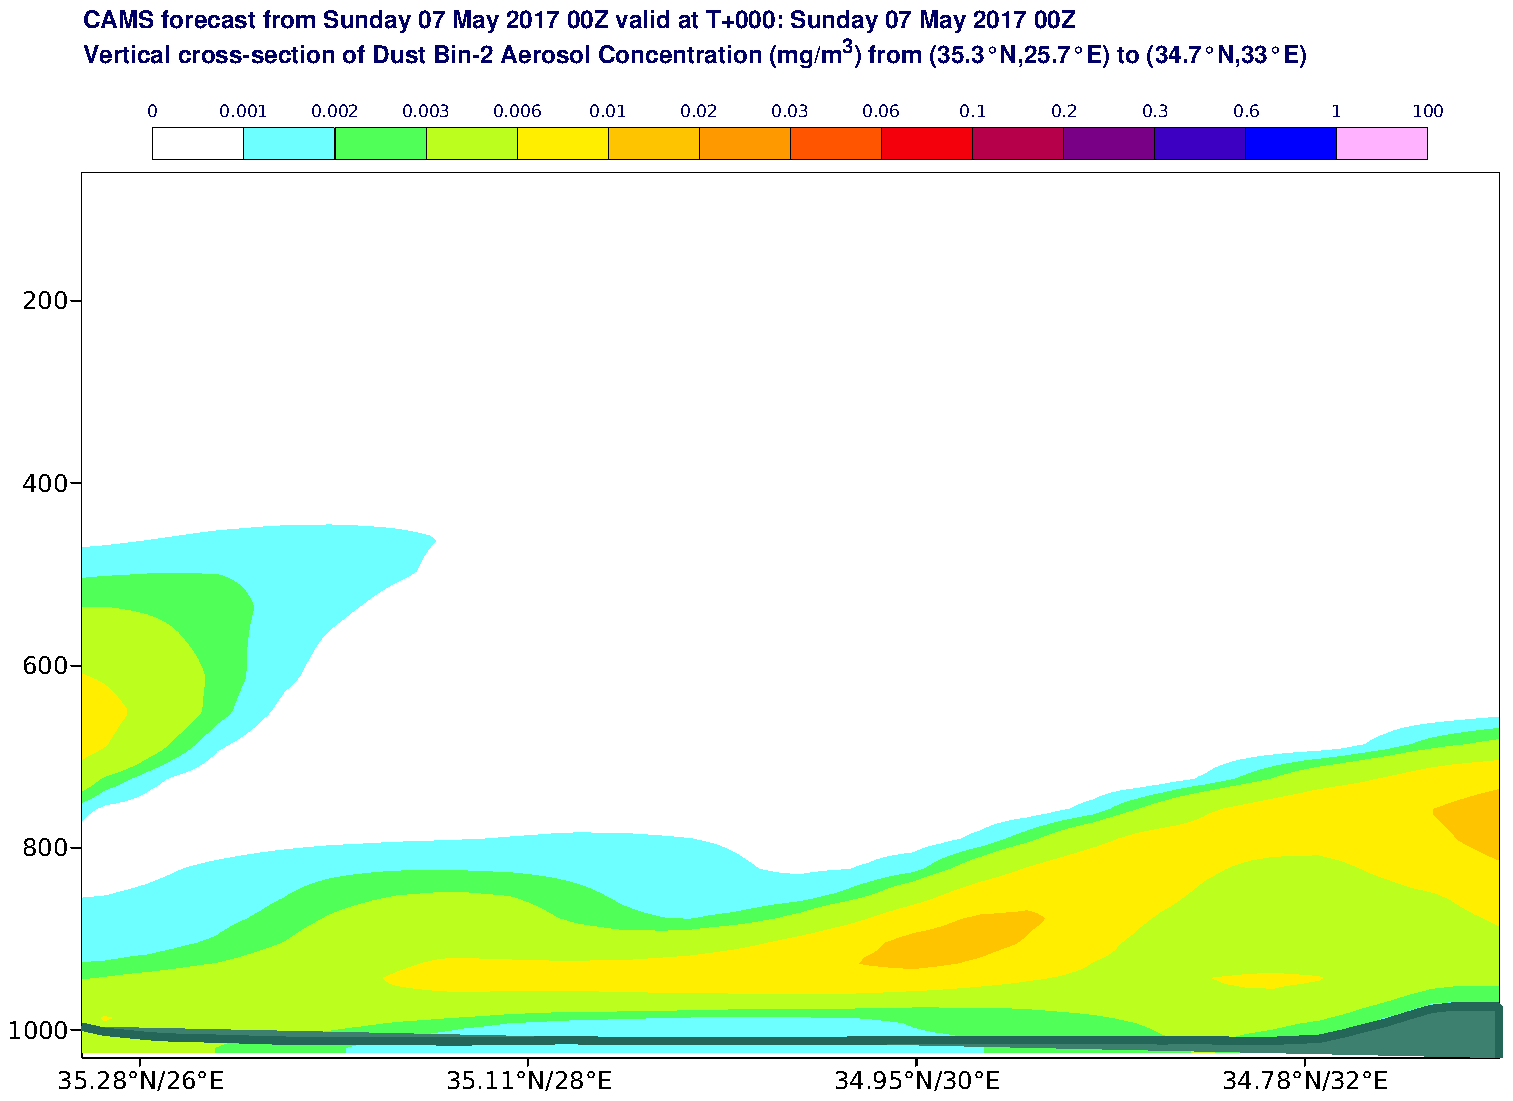 Vertical cross-section of Dust Bin-2 Aerosol Concentration (mg/m3) valid at T0 - 2017-05-07 00:00